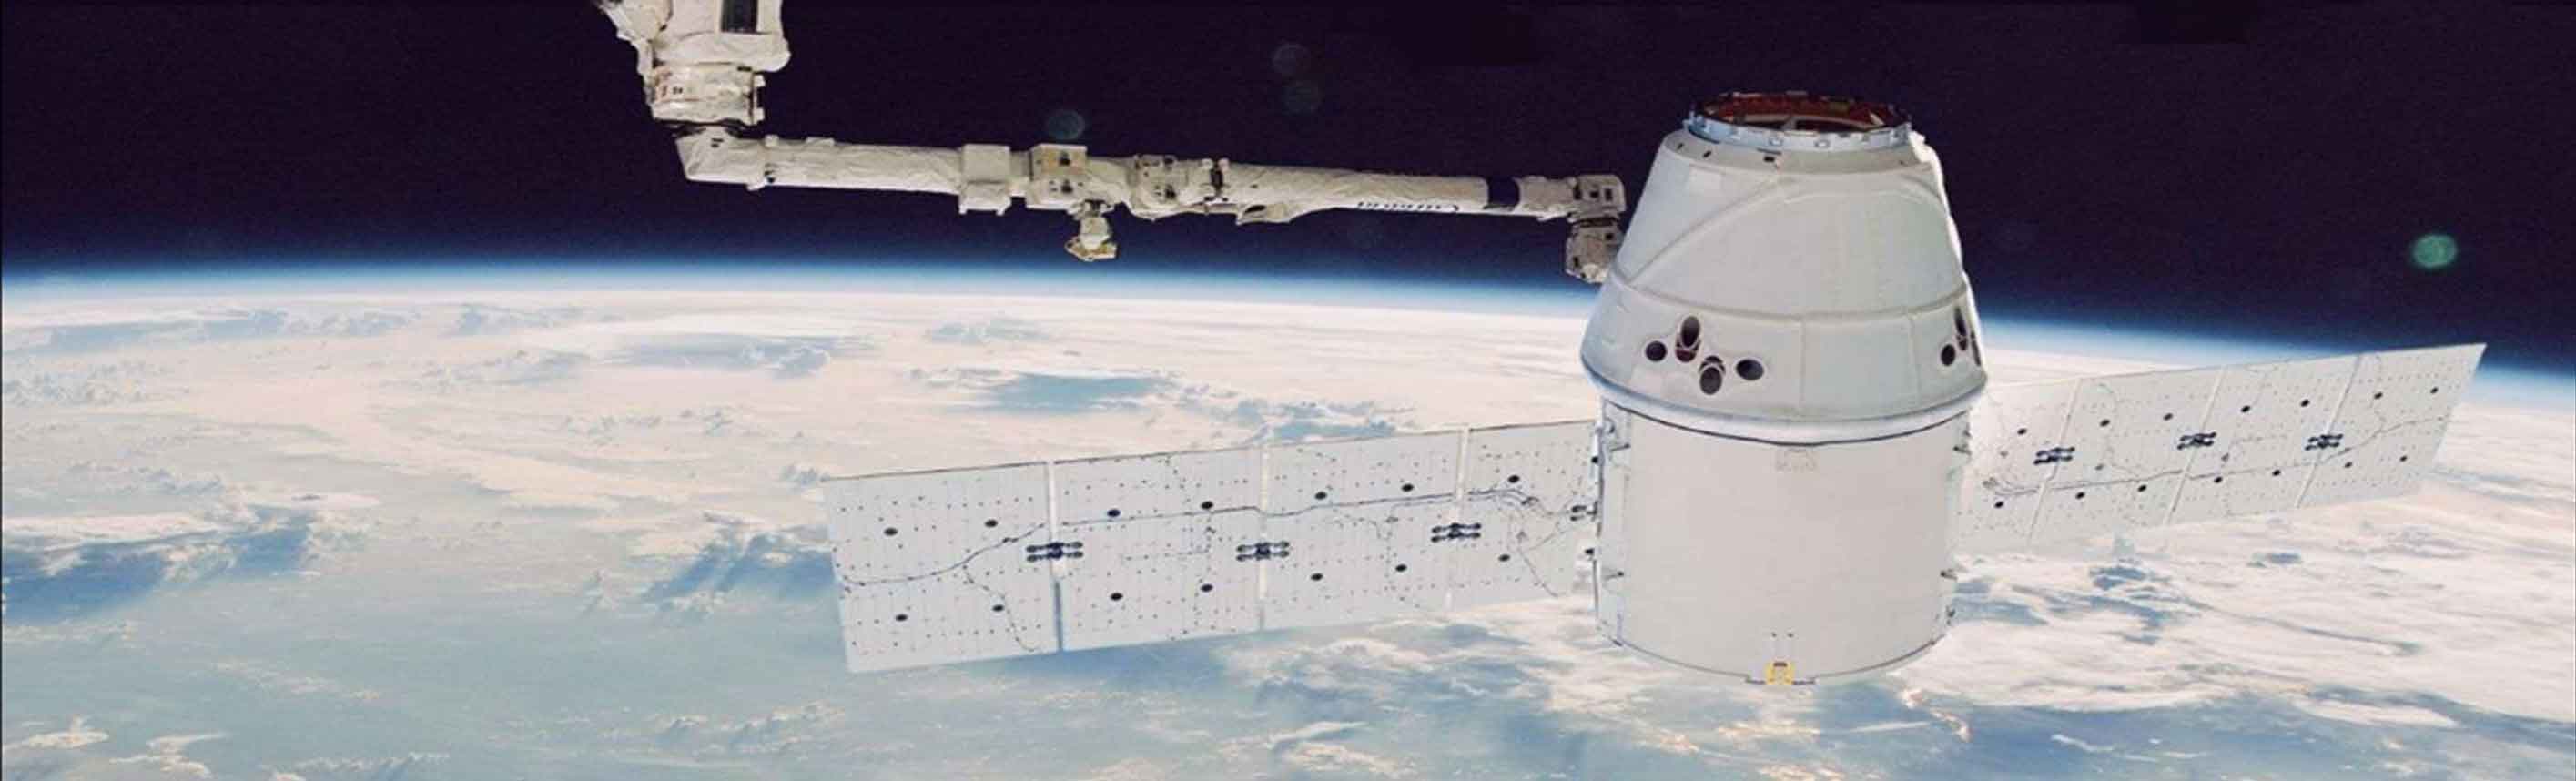 Image of space craft orbiting the earth with solar panels